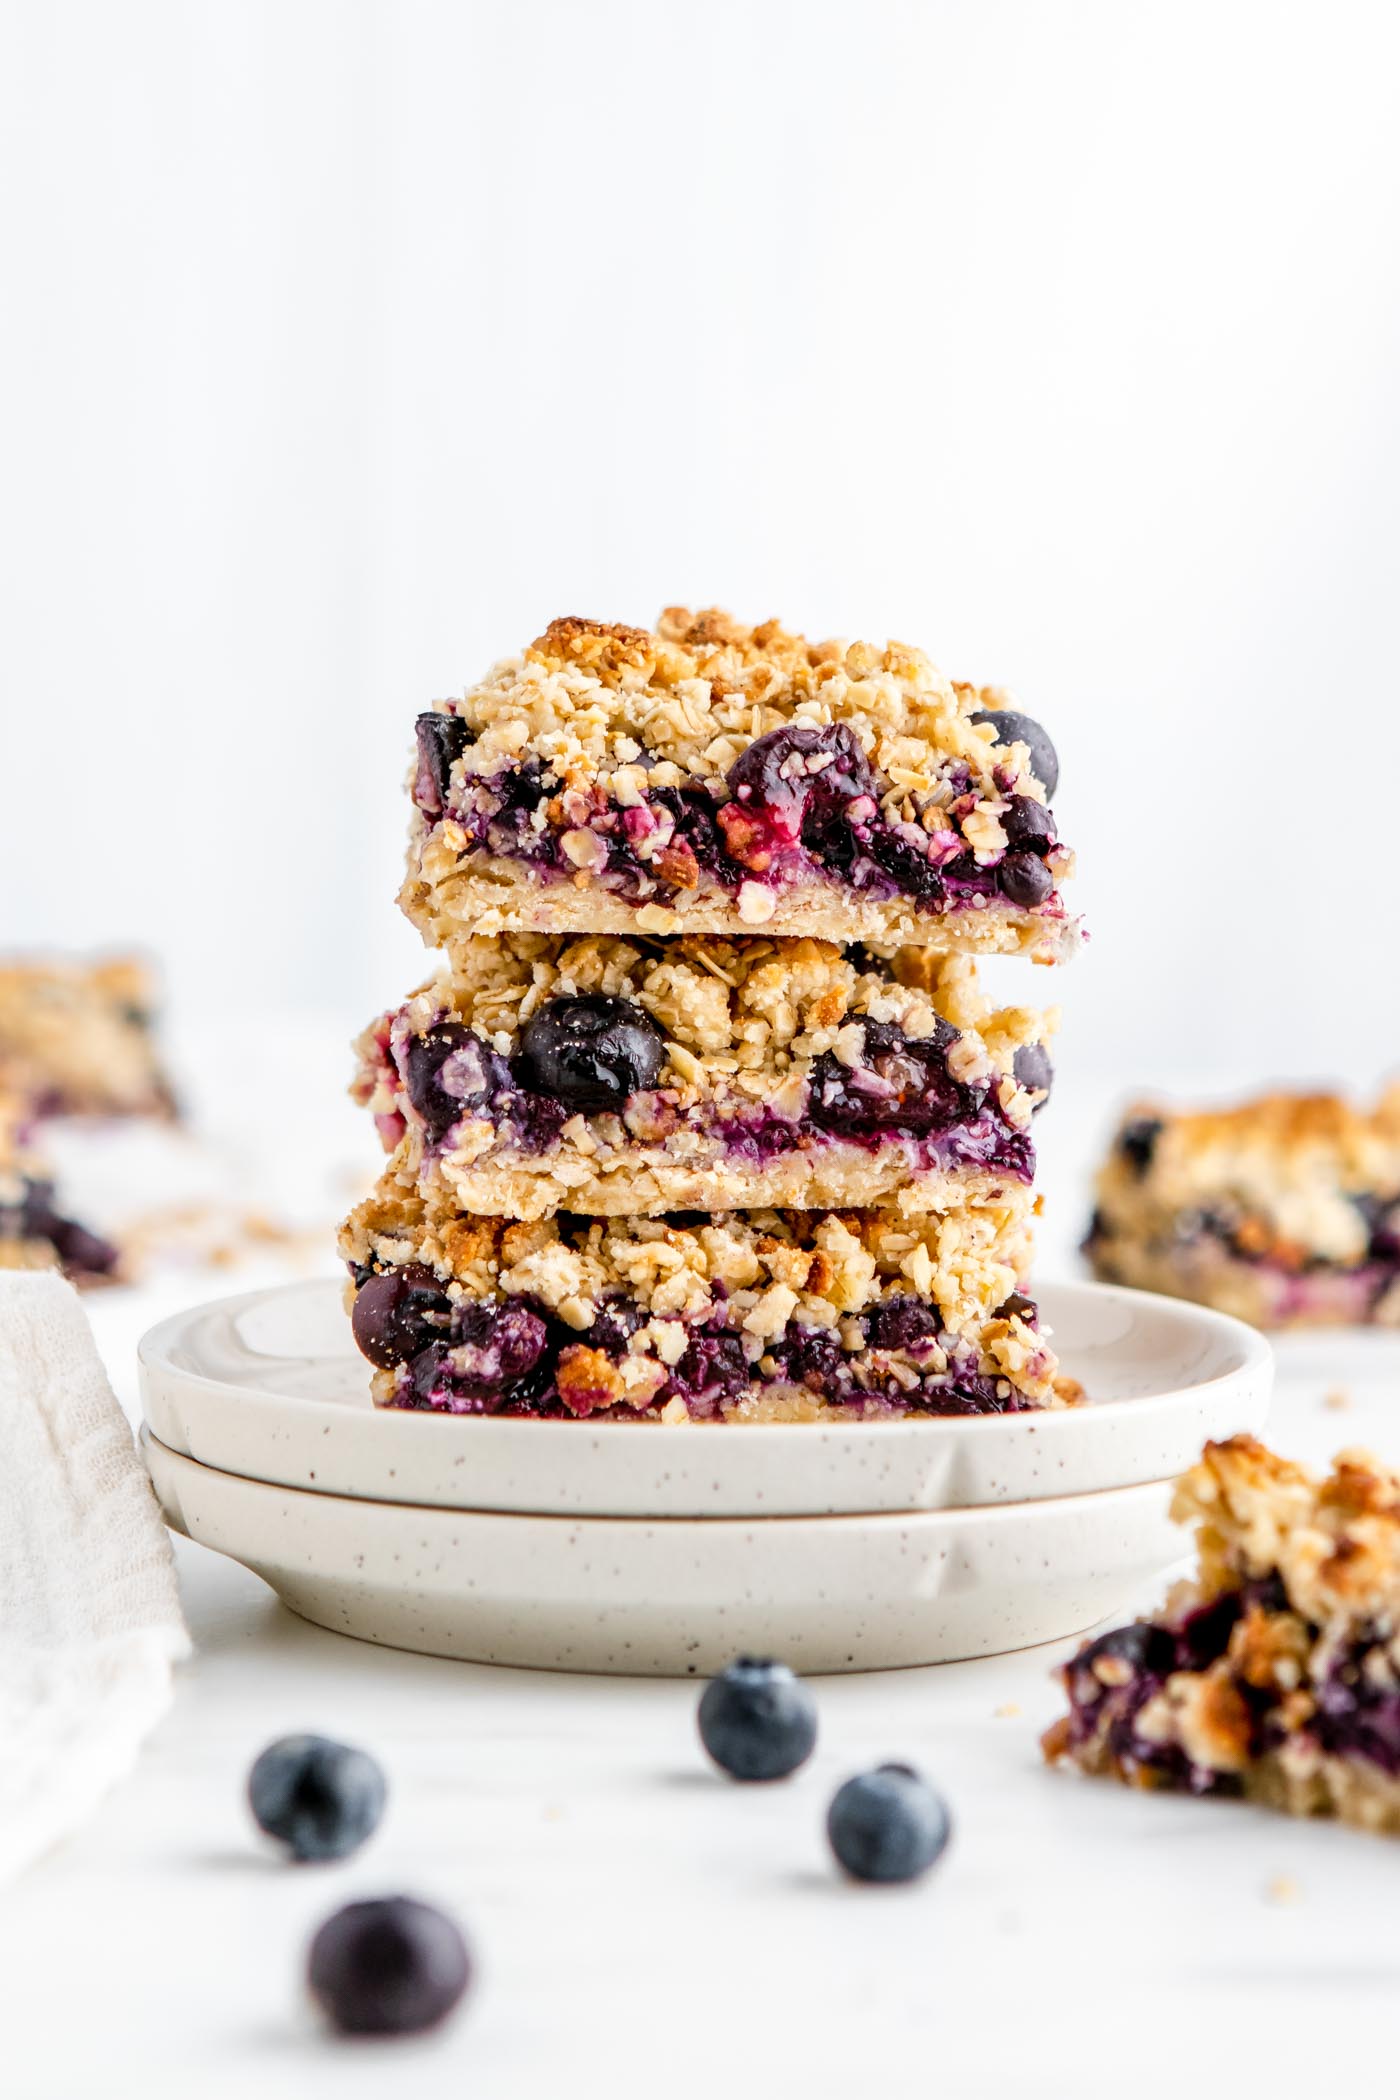 Blueberry Crumble Bars
